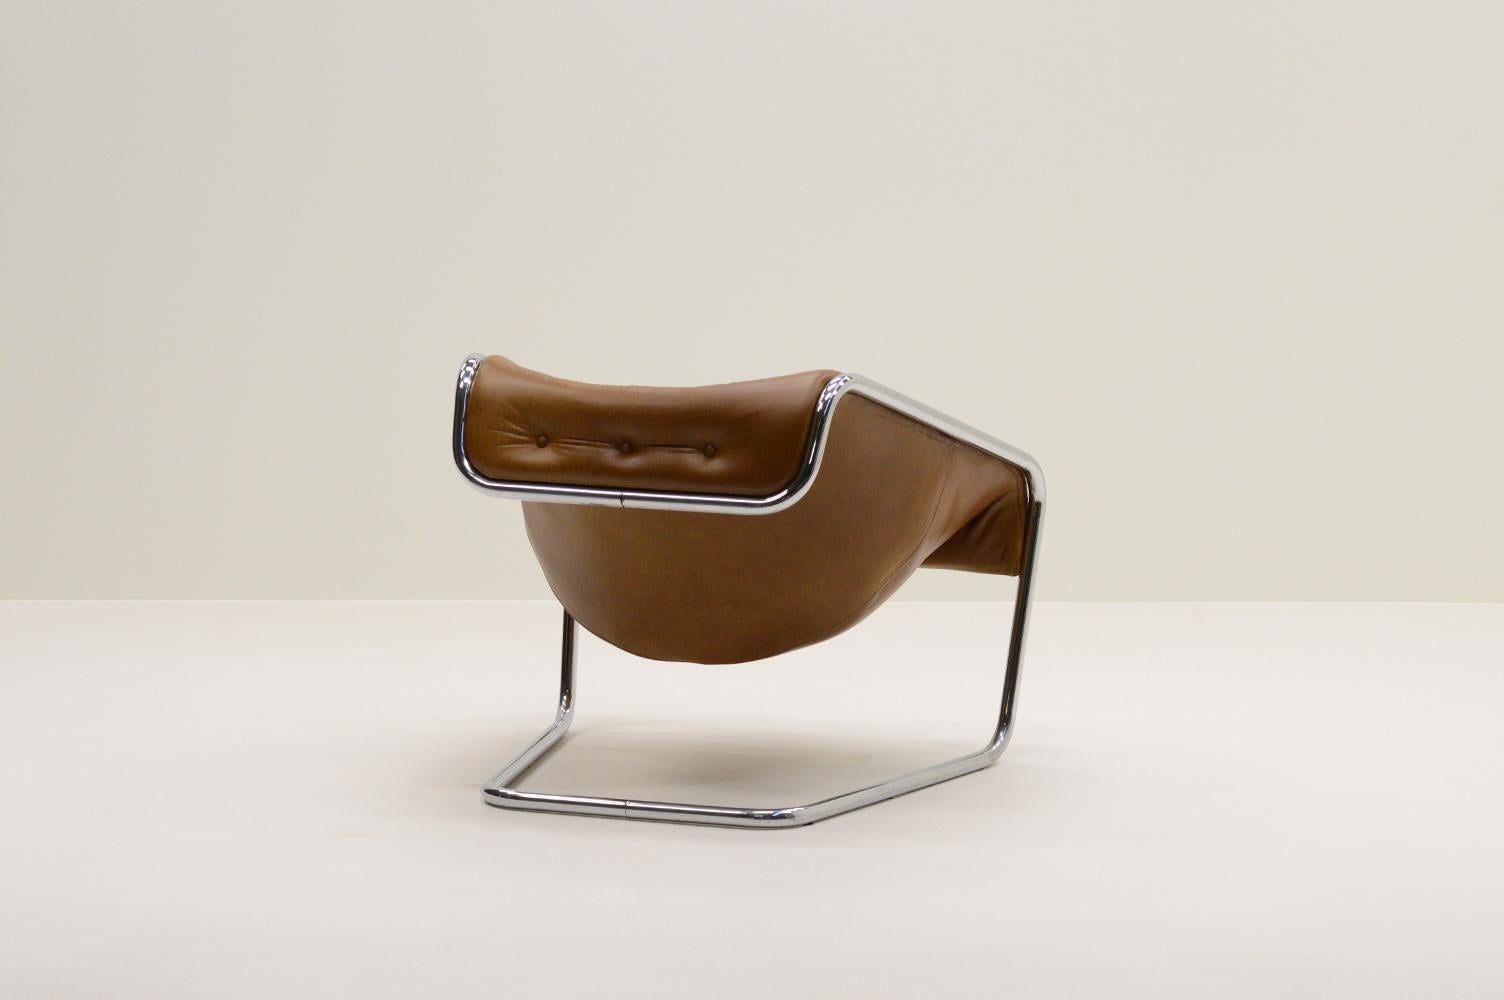 French Boxer lounge chair by Kwok Hoï Chan for Steiner, 1970s France. 